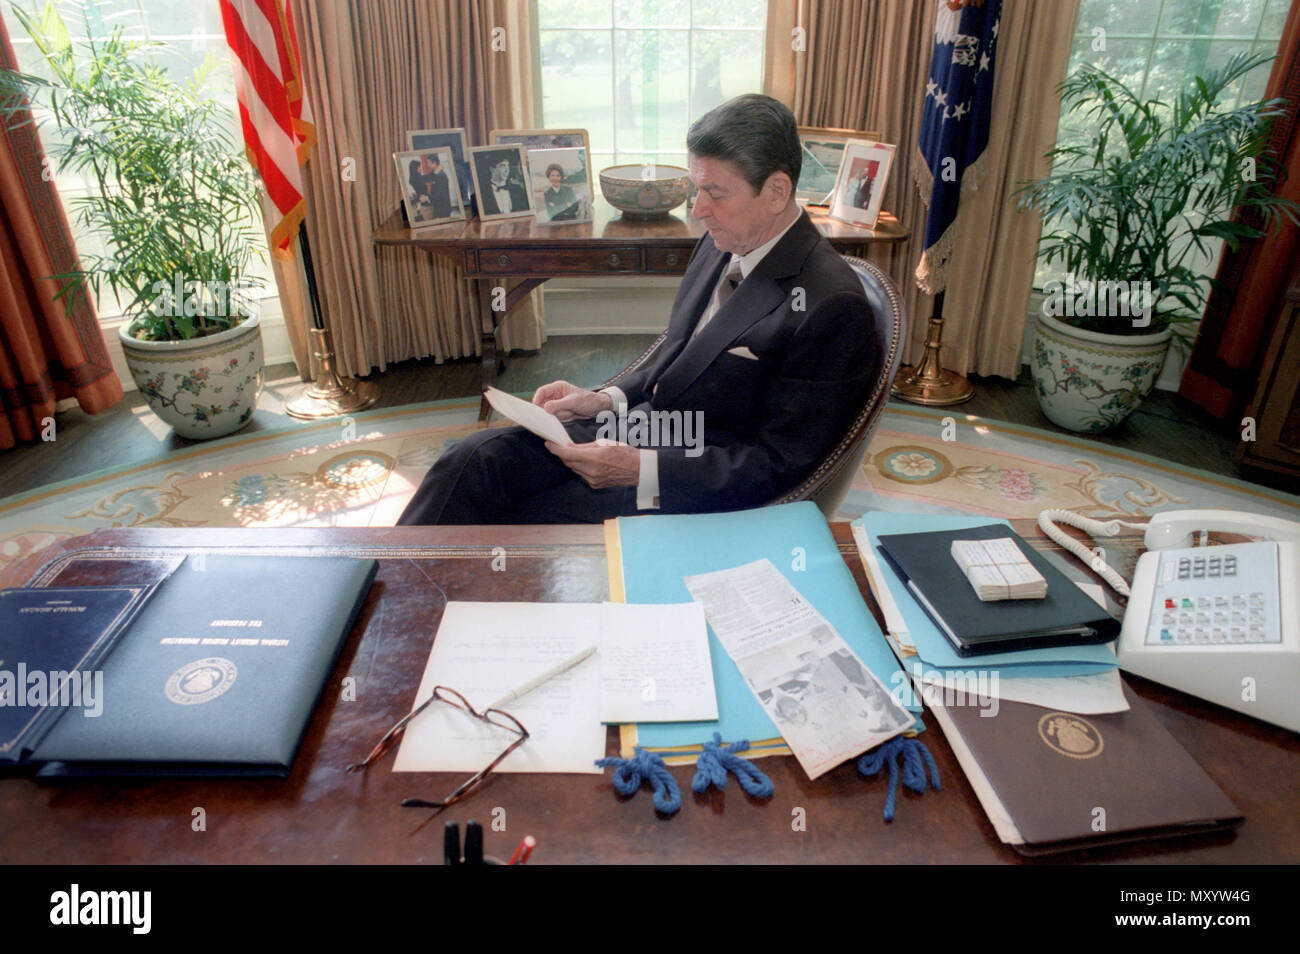 4/28/1981 President Reagan reading in the Oval Office Stock Photo